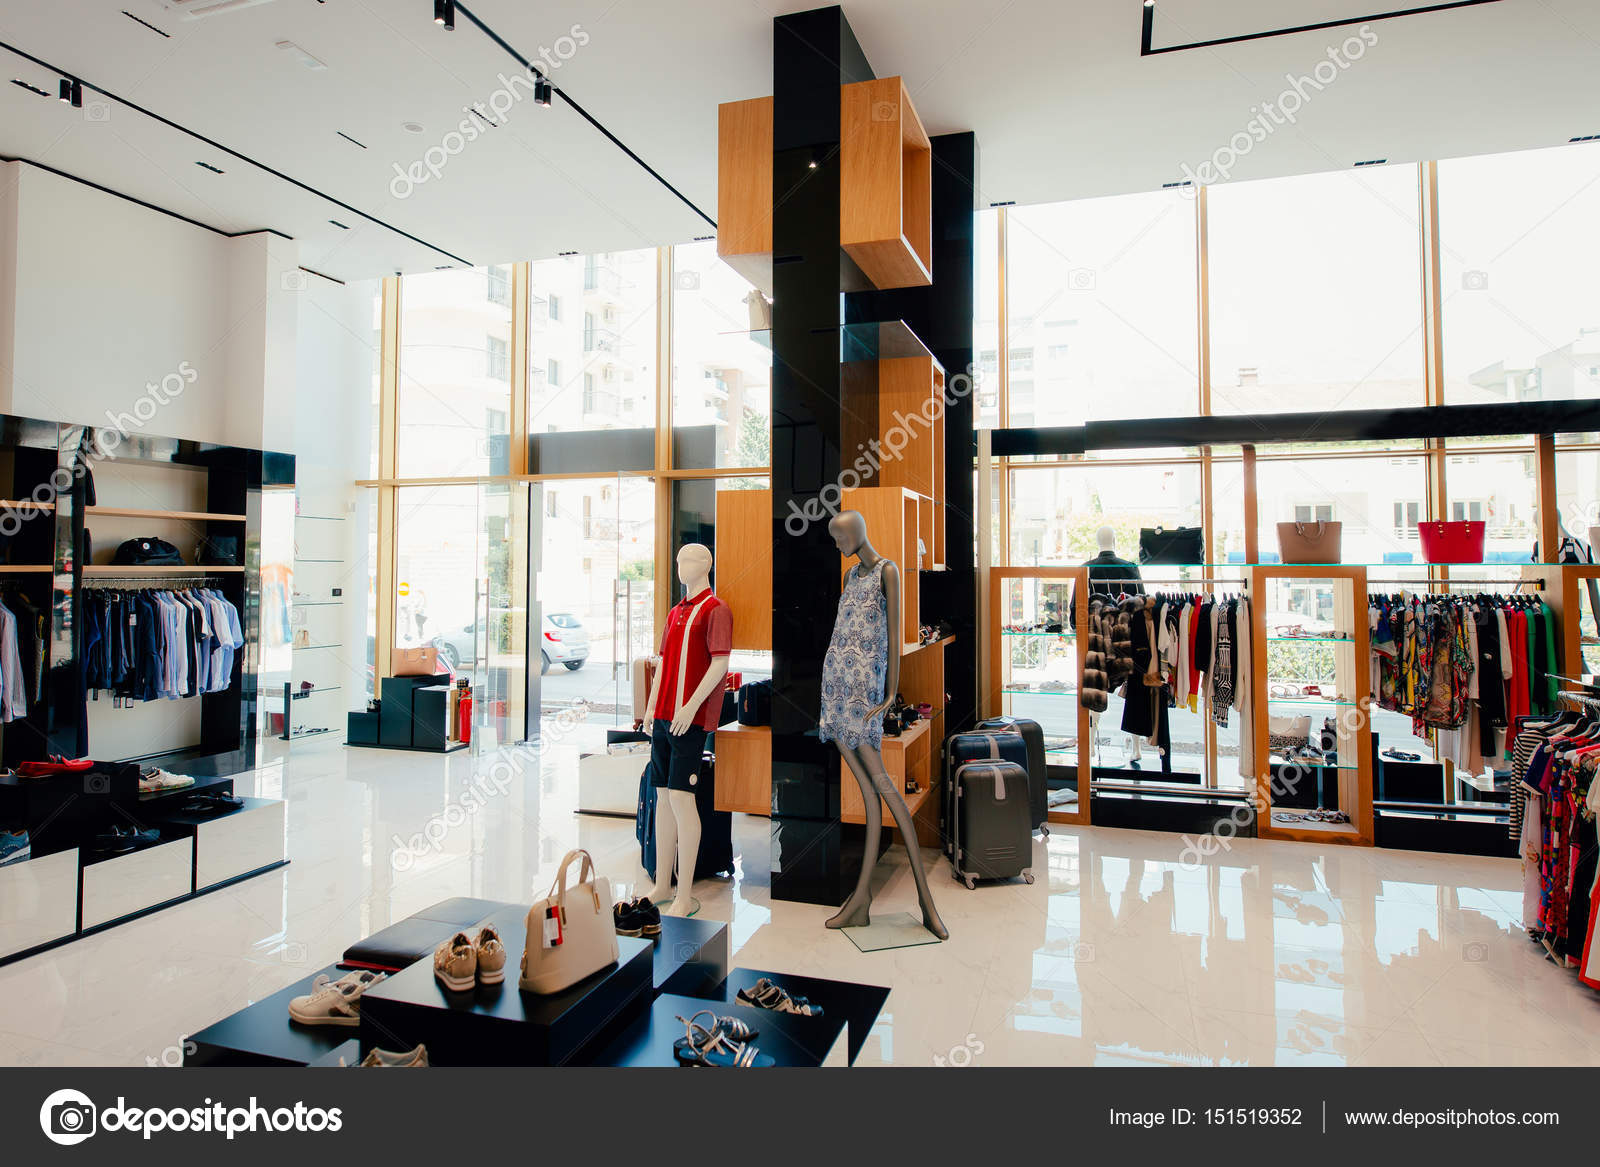 Lady fashion shop interior stock photo. Image of commercial